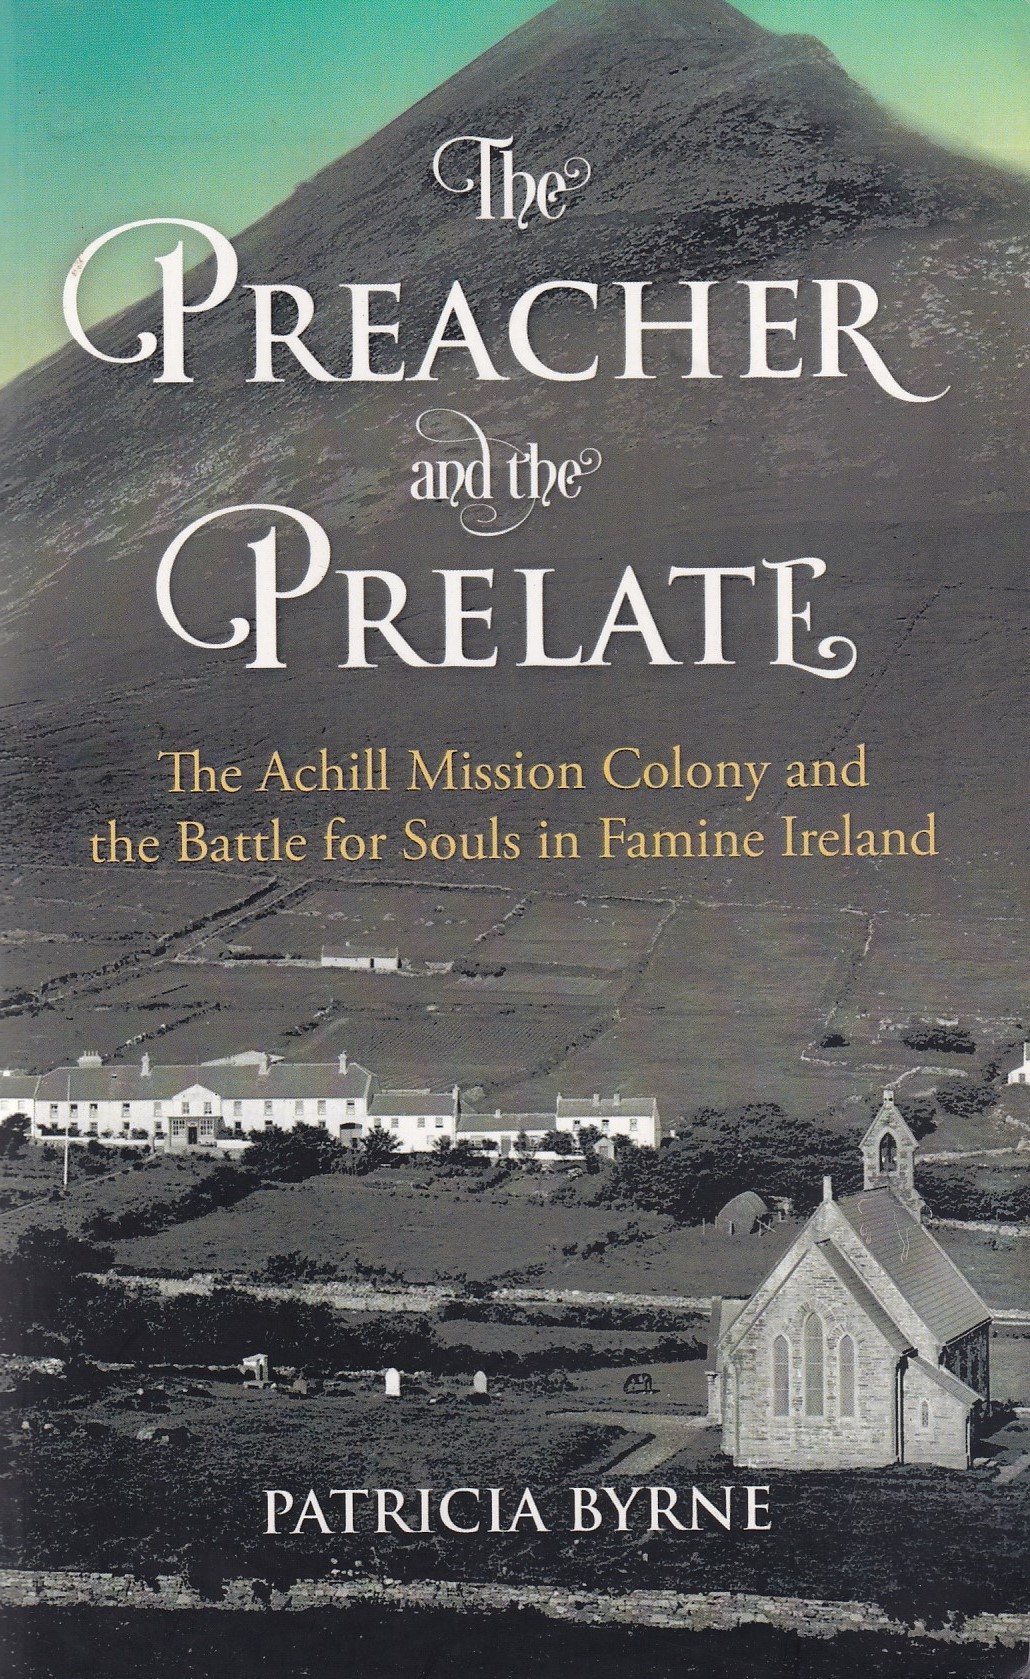 The Preacher and the Prelate: The Achill Mission Colony and the Battle for Souls in Famine Ireland by Patricia Byrne